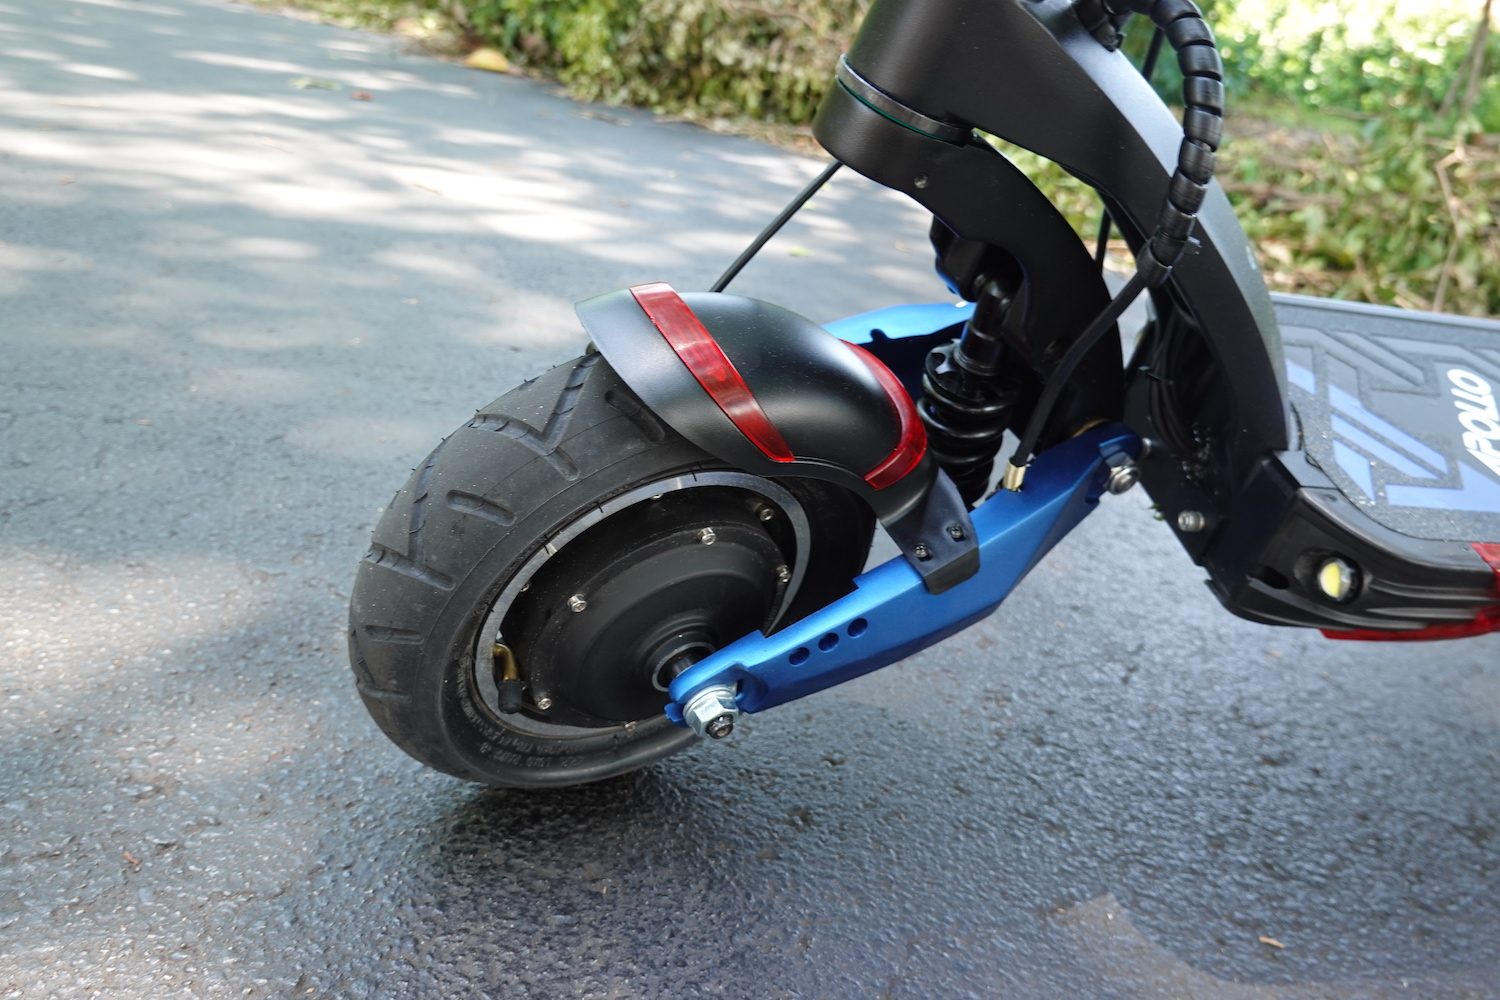 Test -- 38 MPH and 2000 watt electric scooter! - Blog - 2